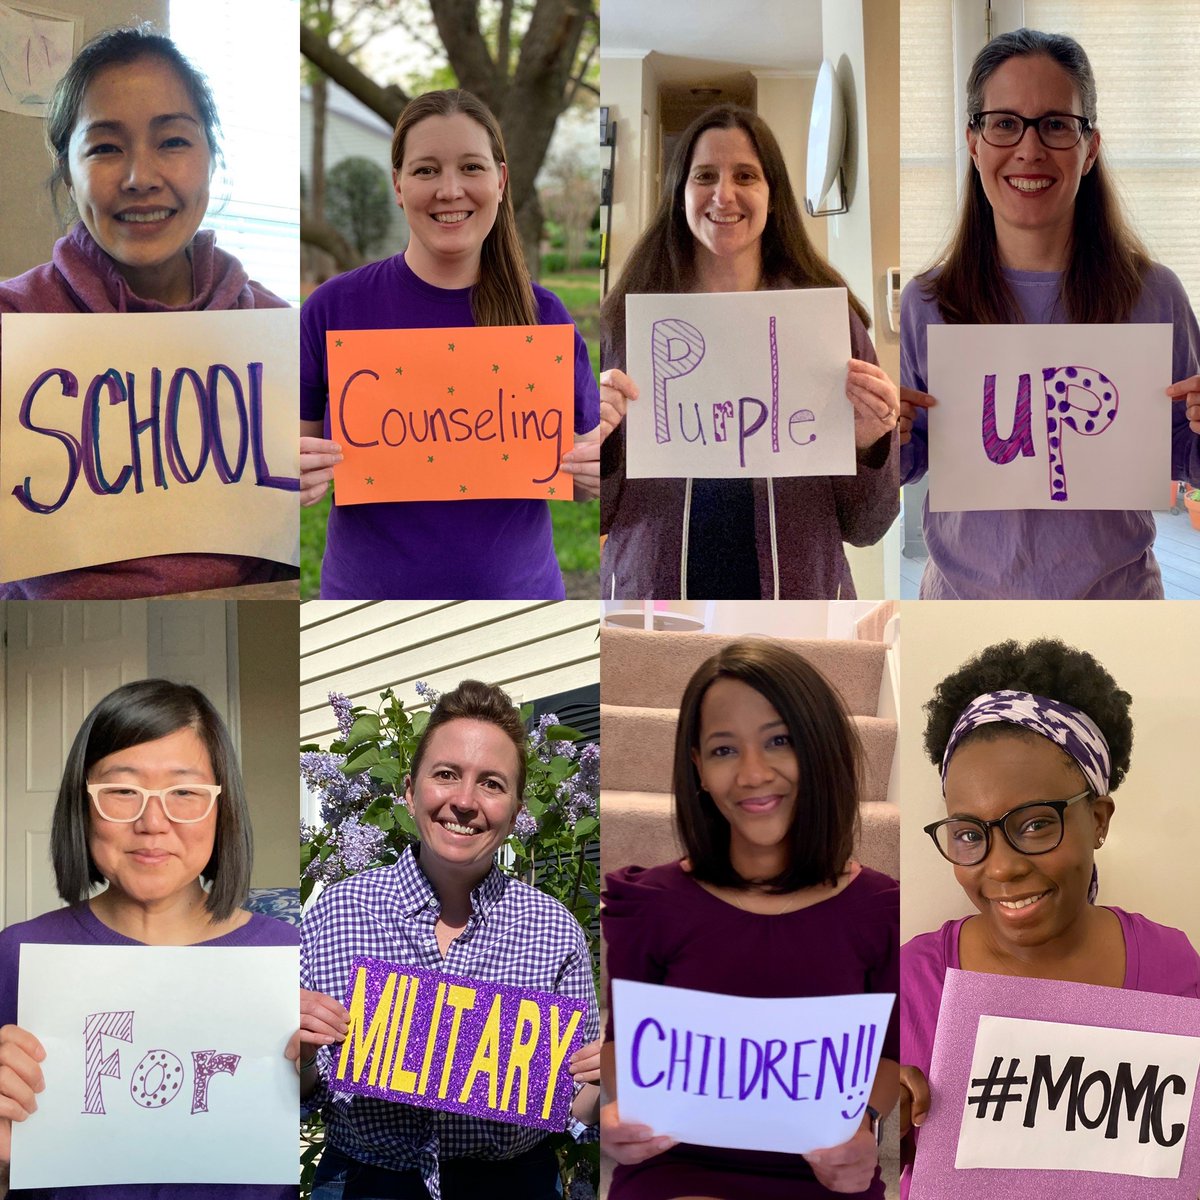 FCPS is proud to recognize all military-connected children. Each year SCS celebrates the resiliency of military-connected children for their tremendous service & sacrifice at home in the U.S. and overseas. #MOMC  #MonthoftheMilitaryChild #PurpleUpVirginia, #PurpleUpFCPS #PurpleUp